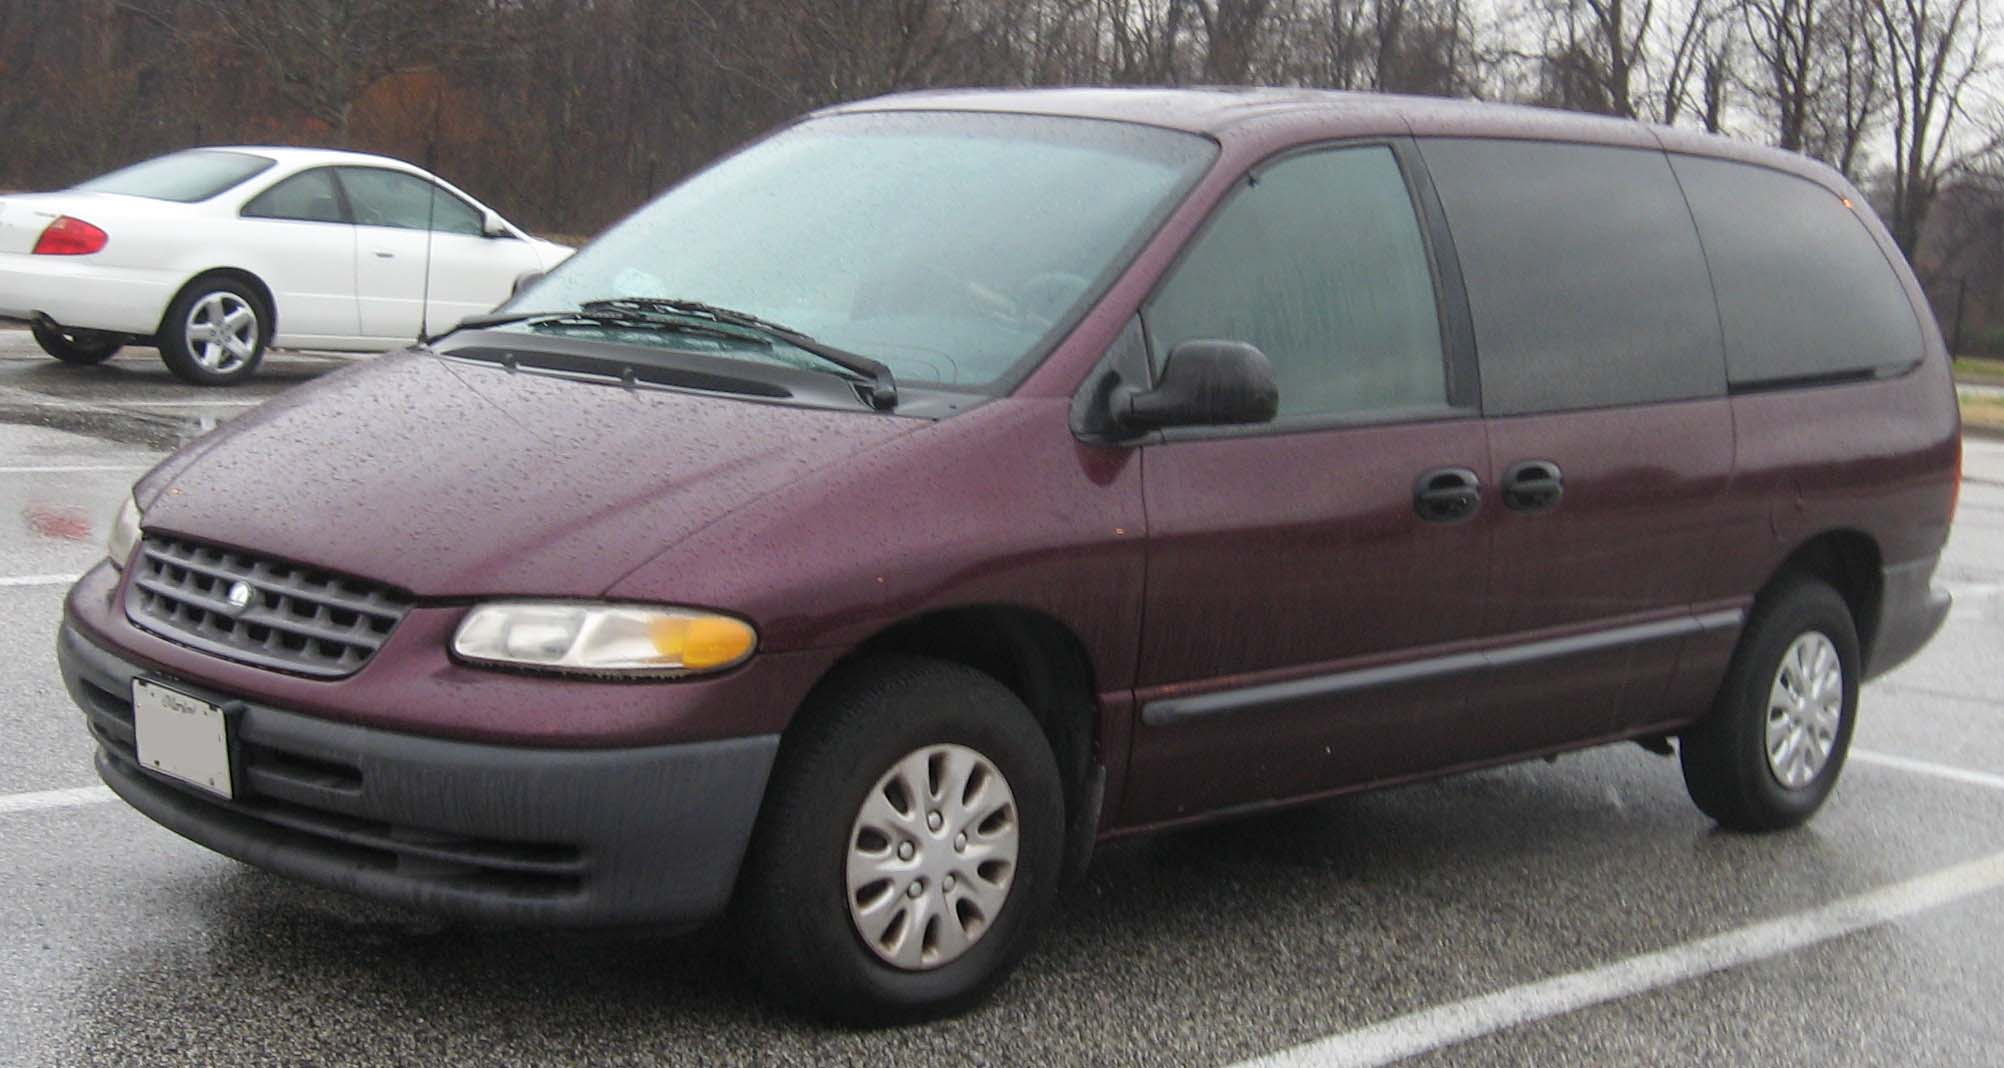 1996 plymouth voyager flasher unit